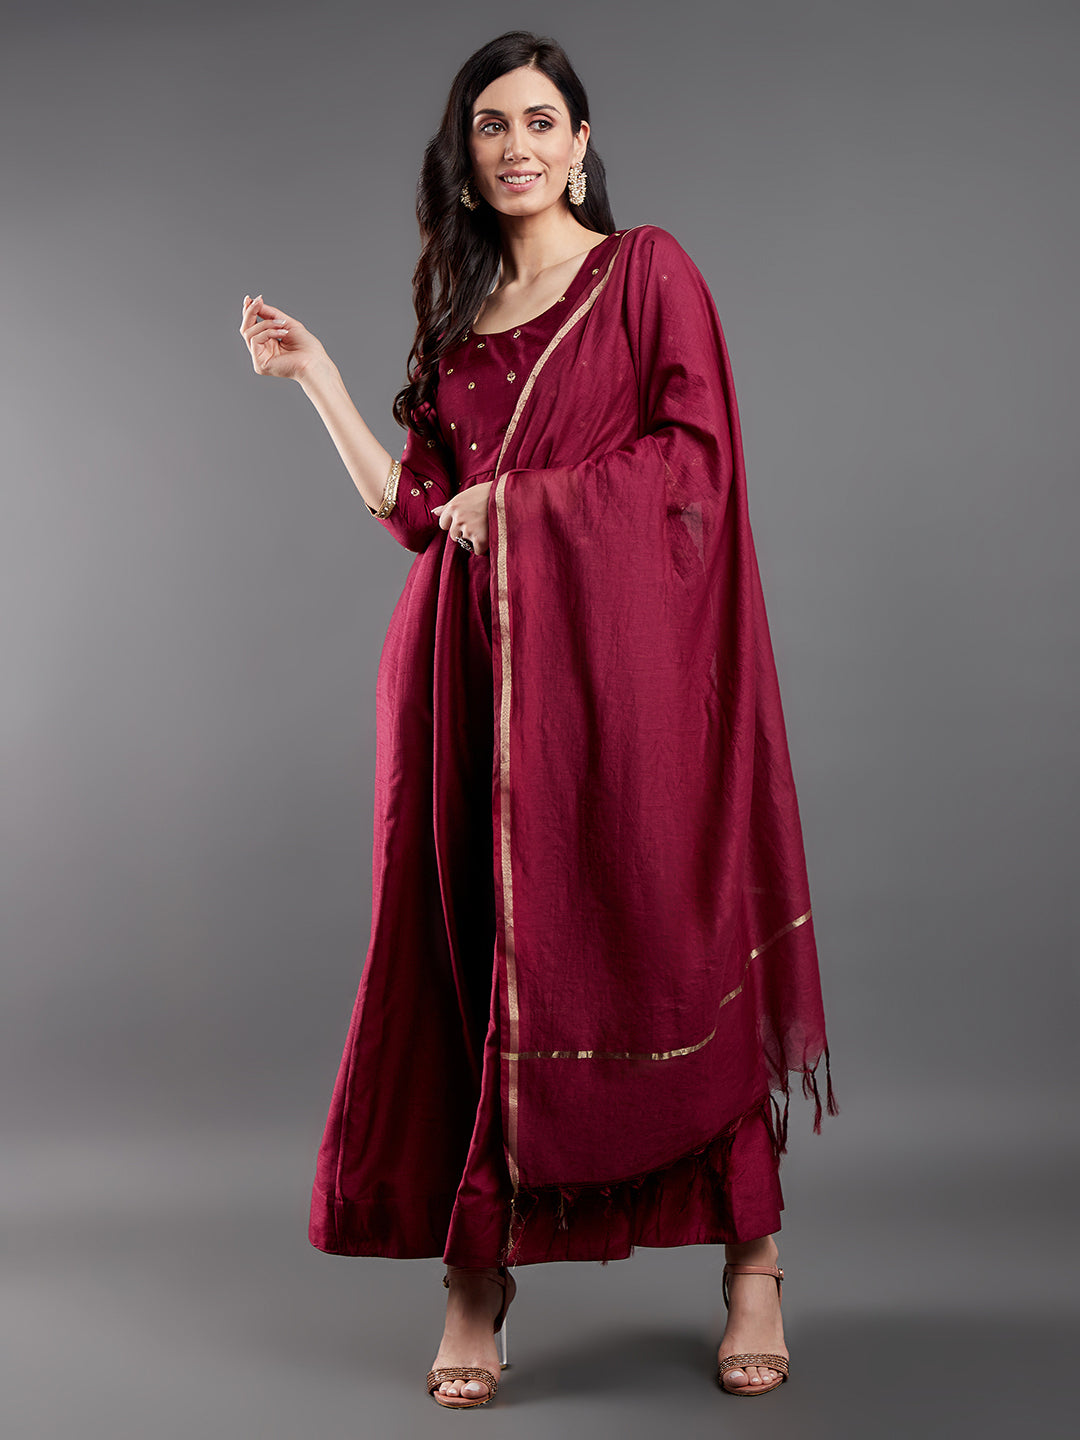 Women's Burgundy Embroidered Maxi Dress With Dupatta - Aks